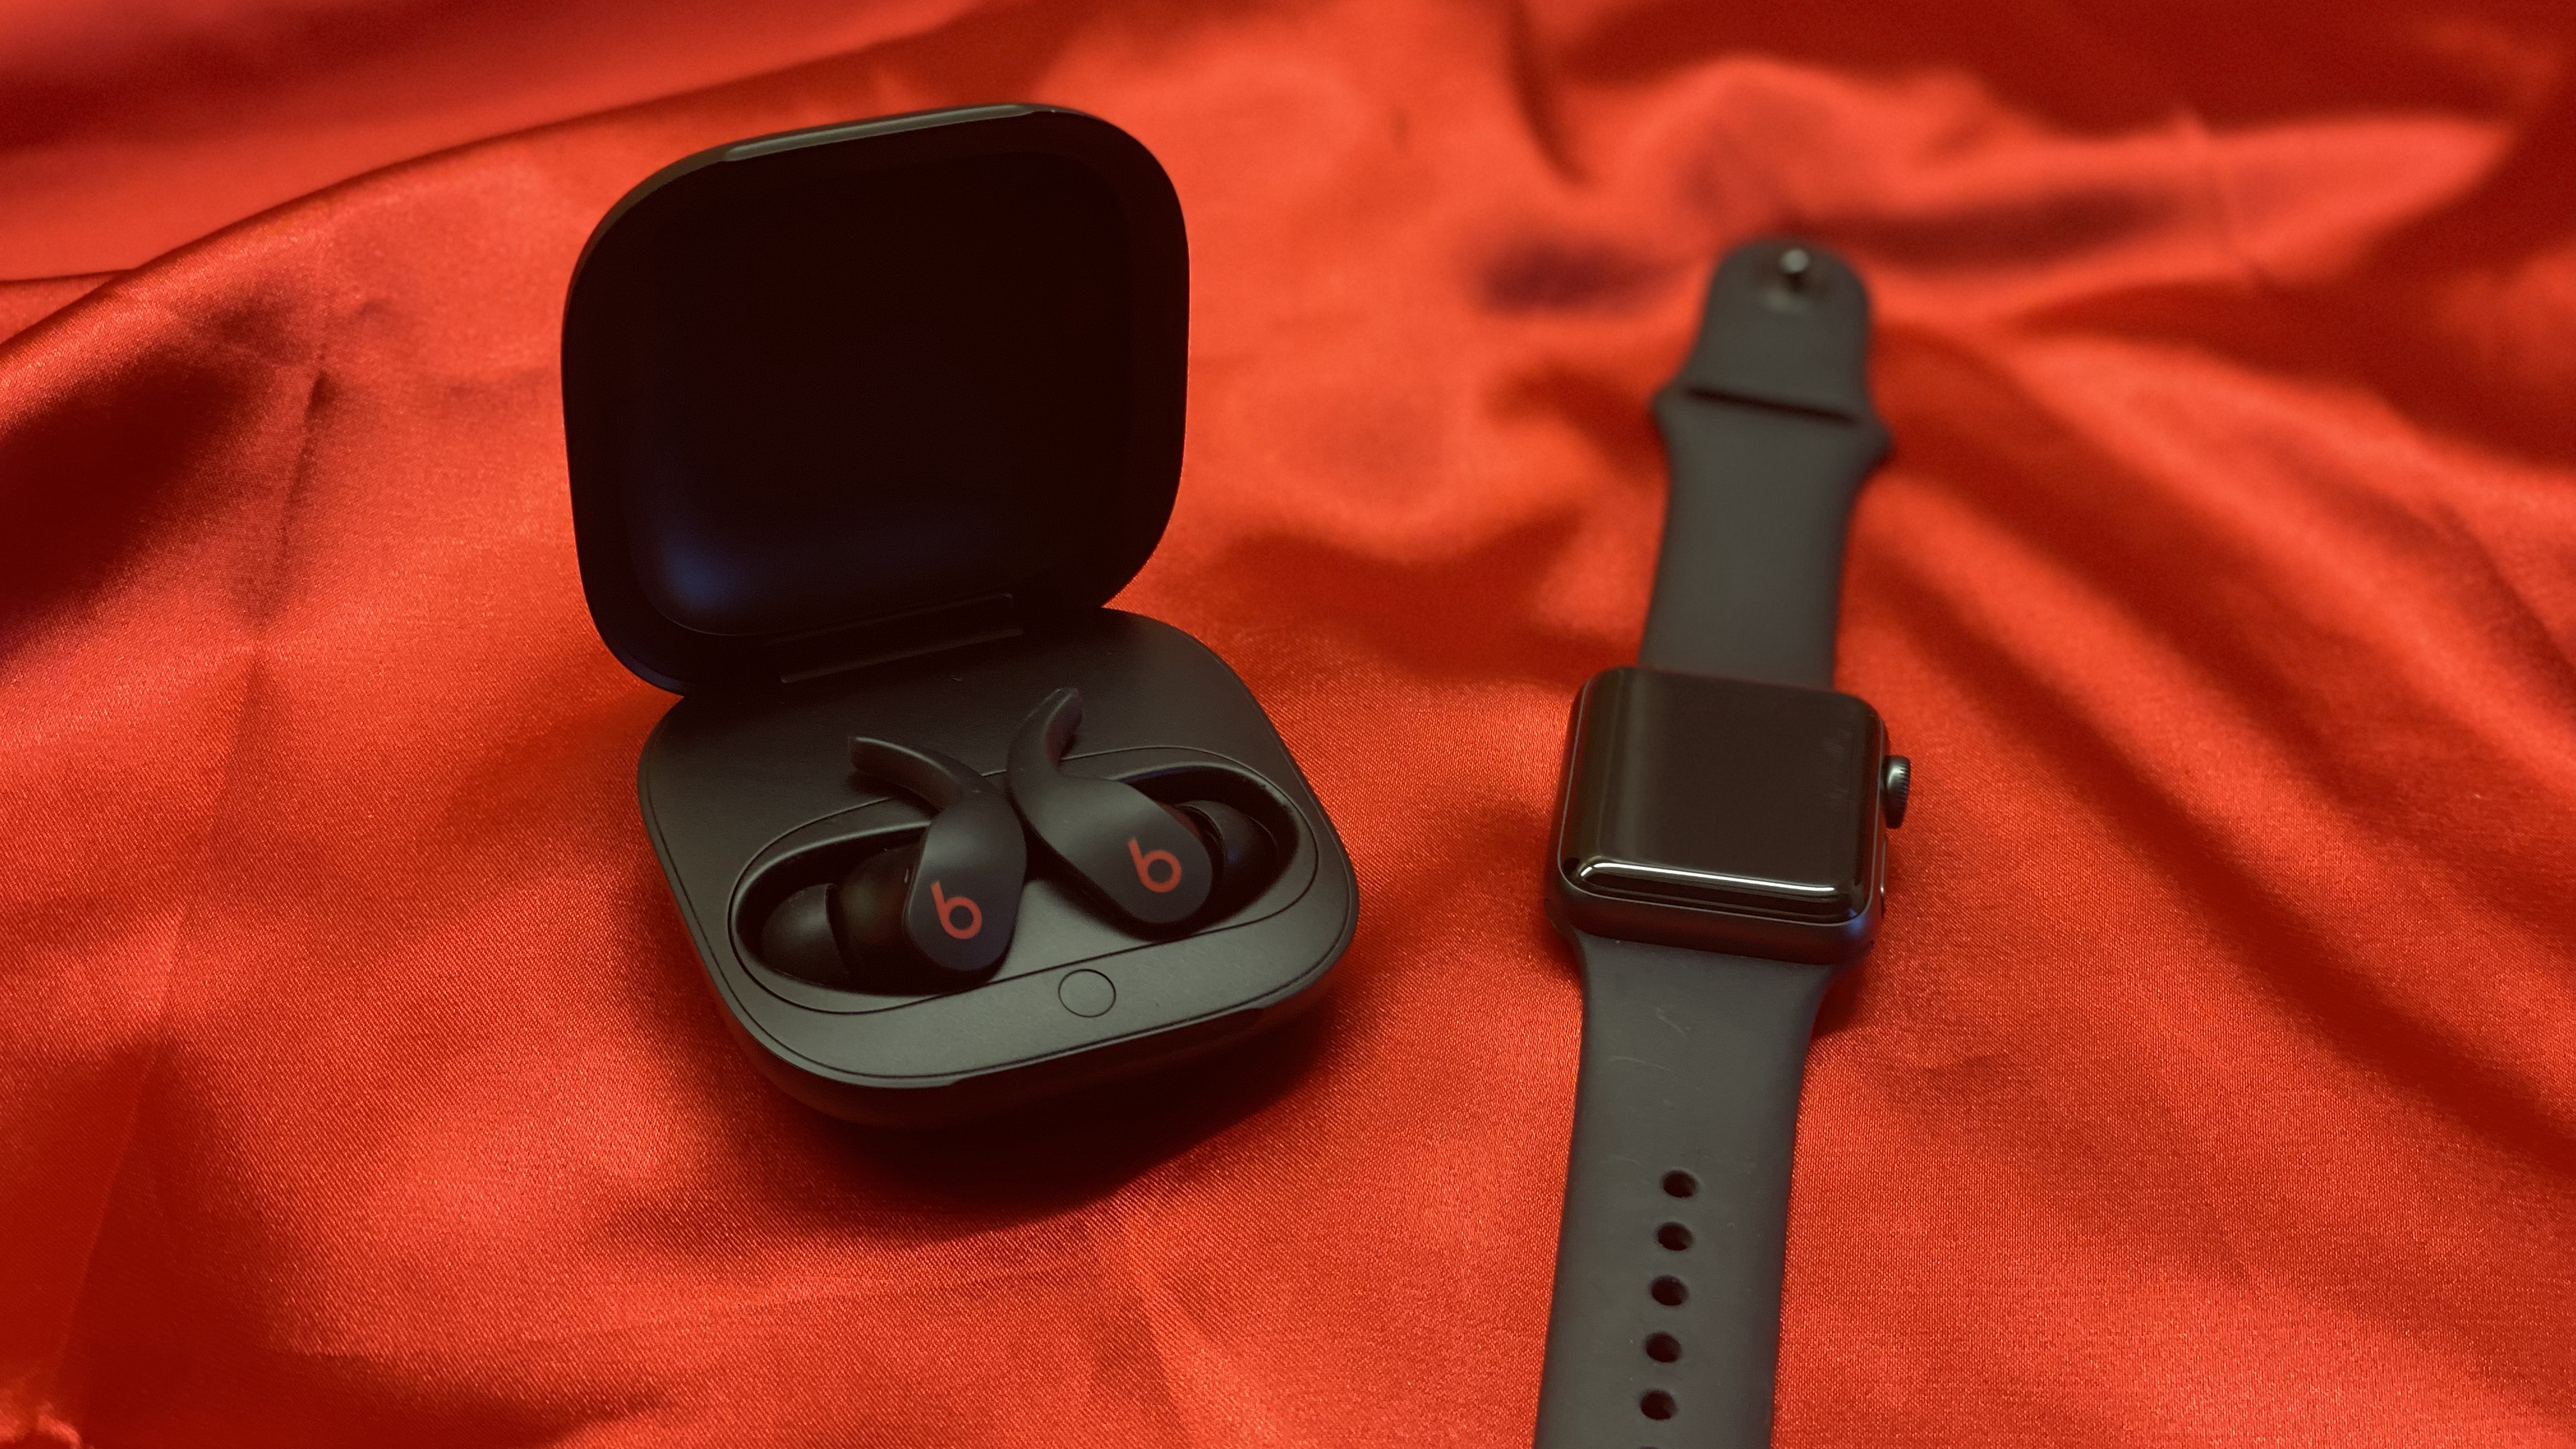 The Beats Fit Pro earbuds in their charging case on a red backdrop next to an Apple Watch